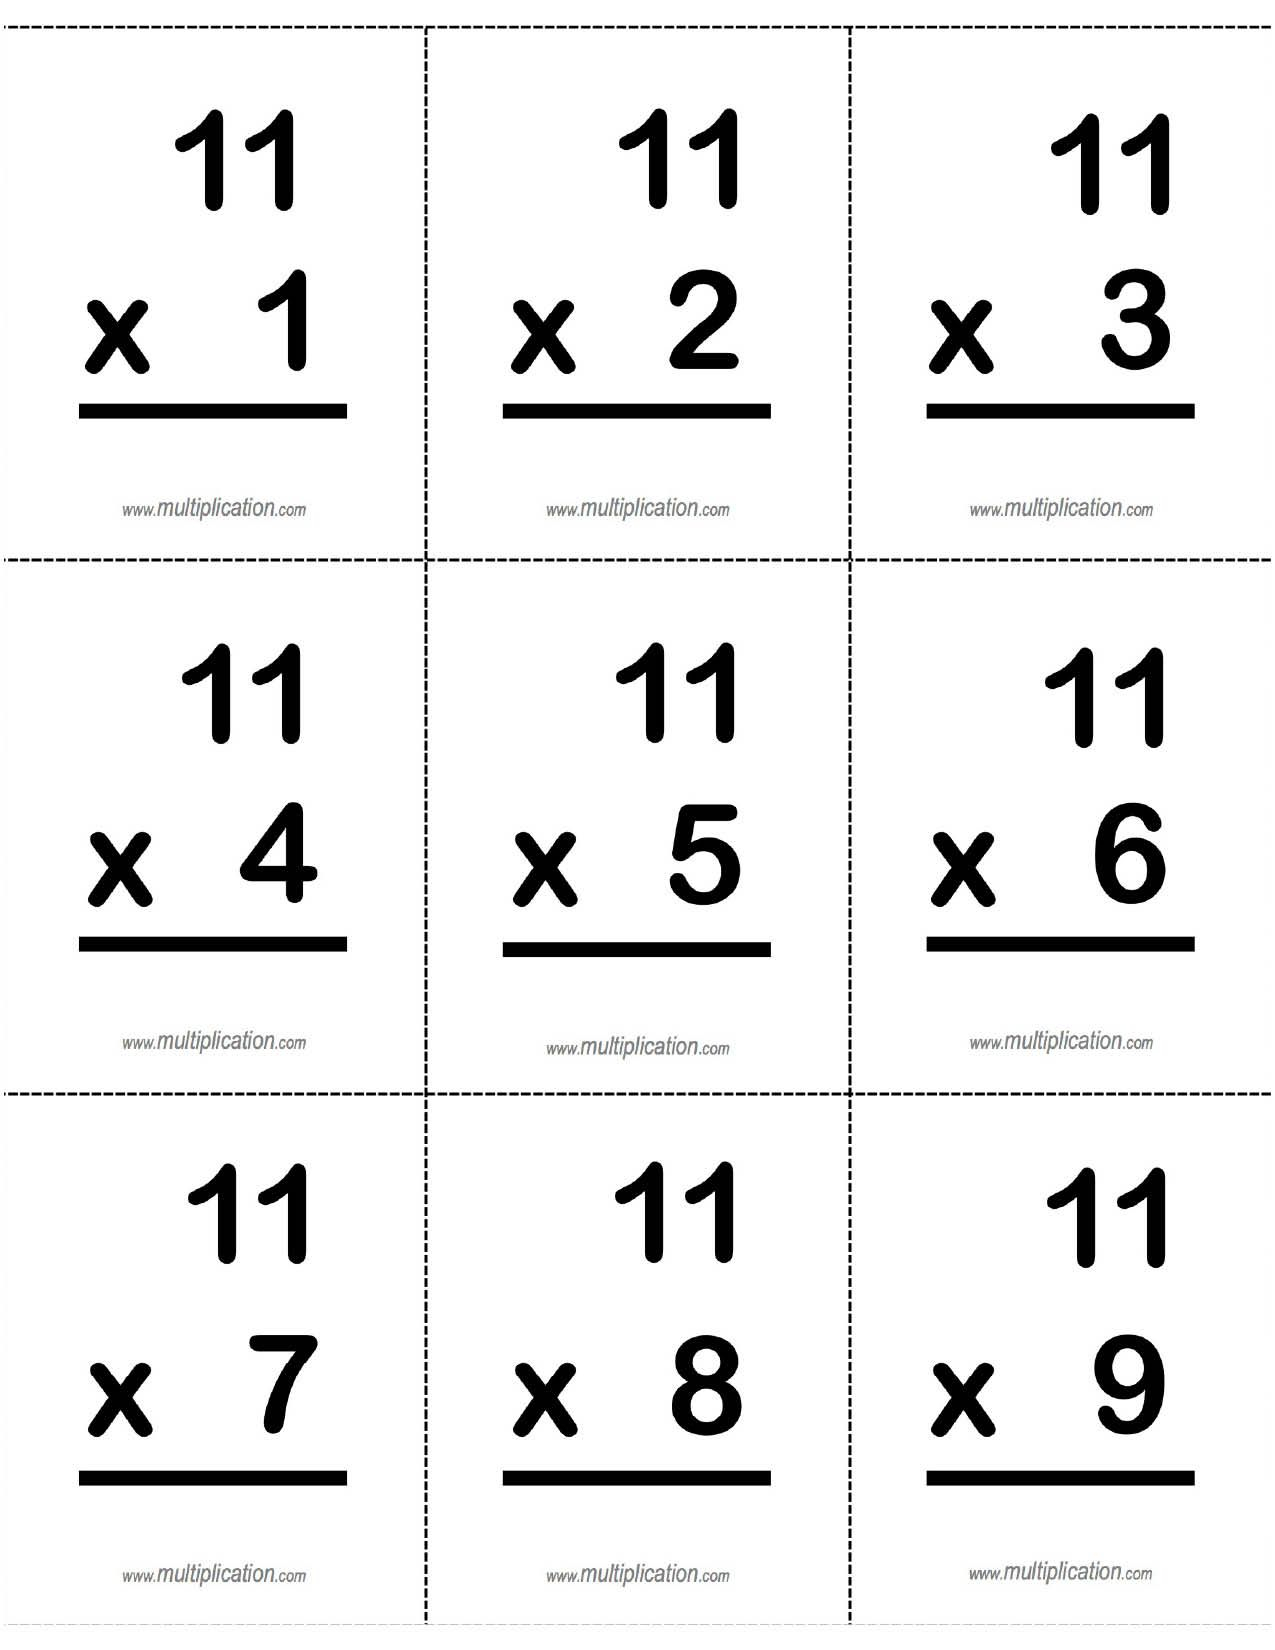 Free Multiplication Flash Cards Printable Front And Back